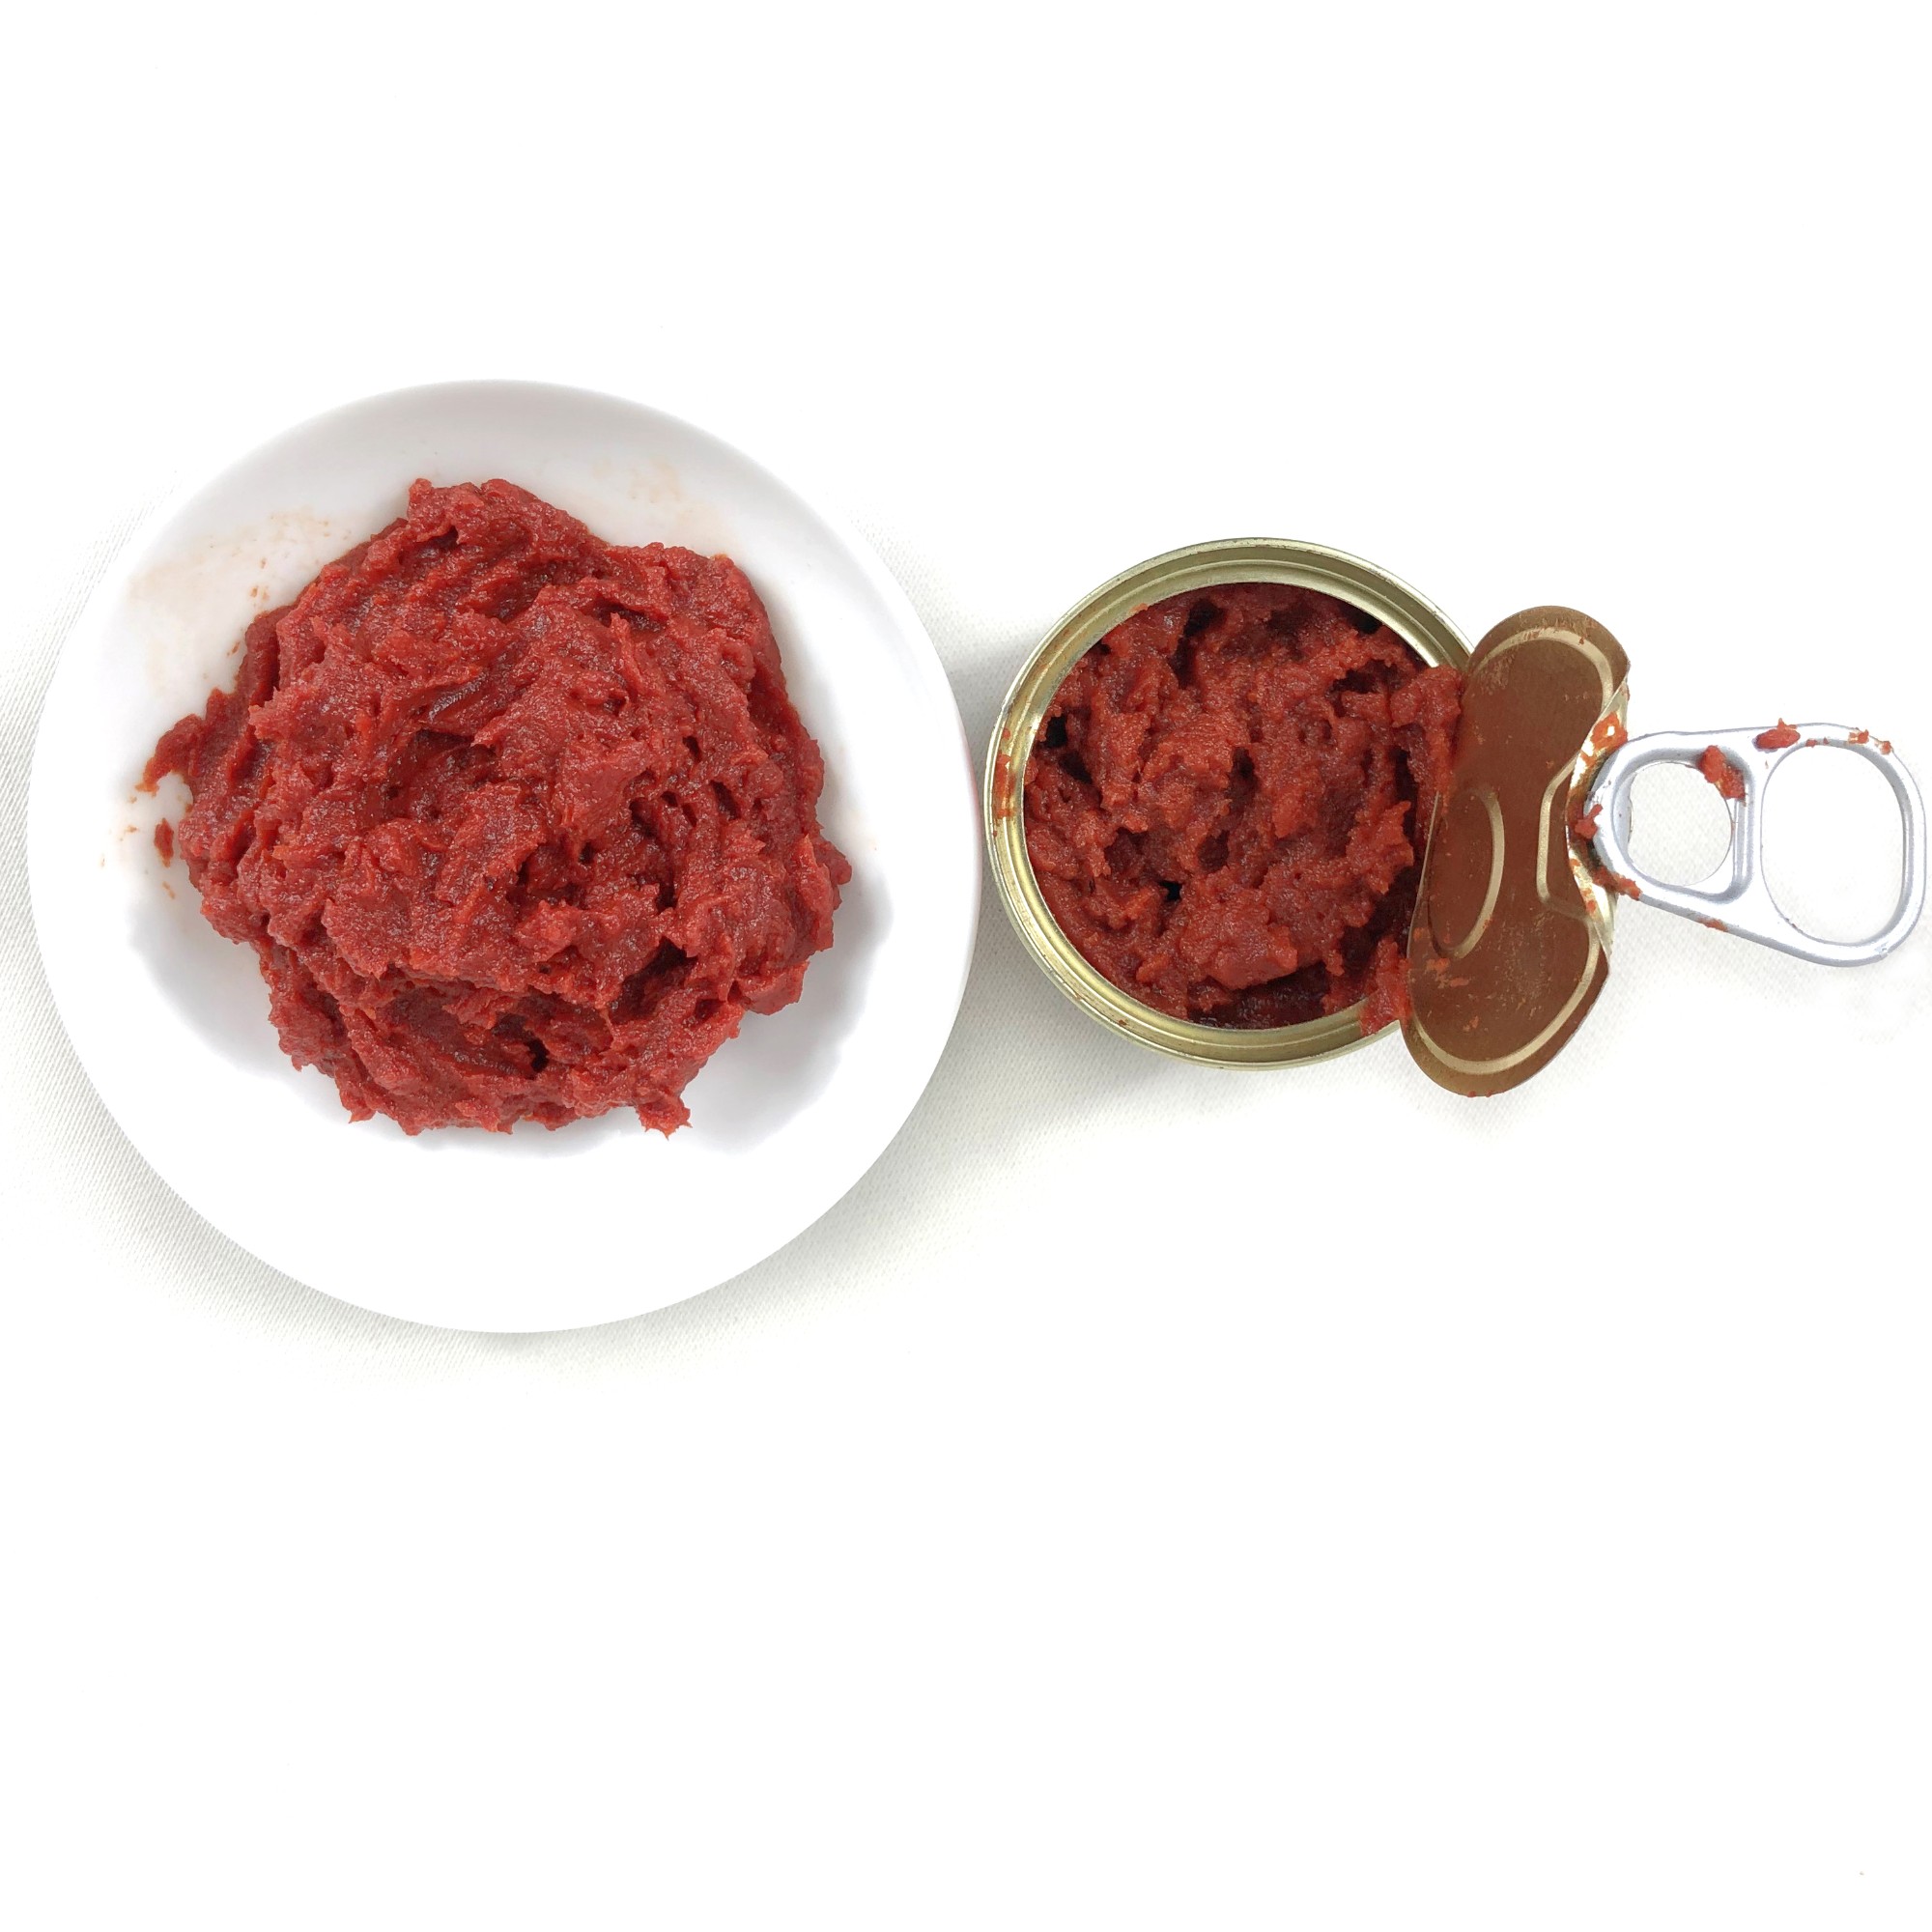 Canned tomato paste 70g